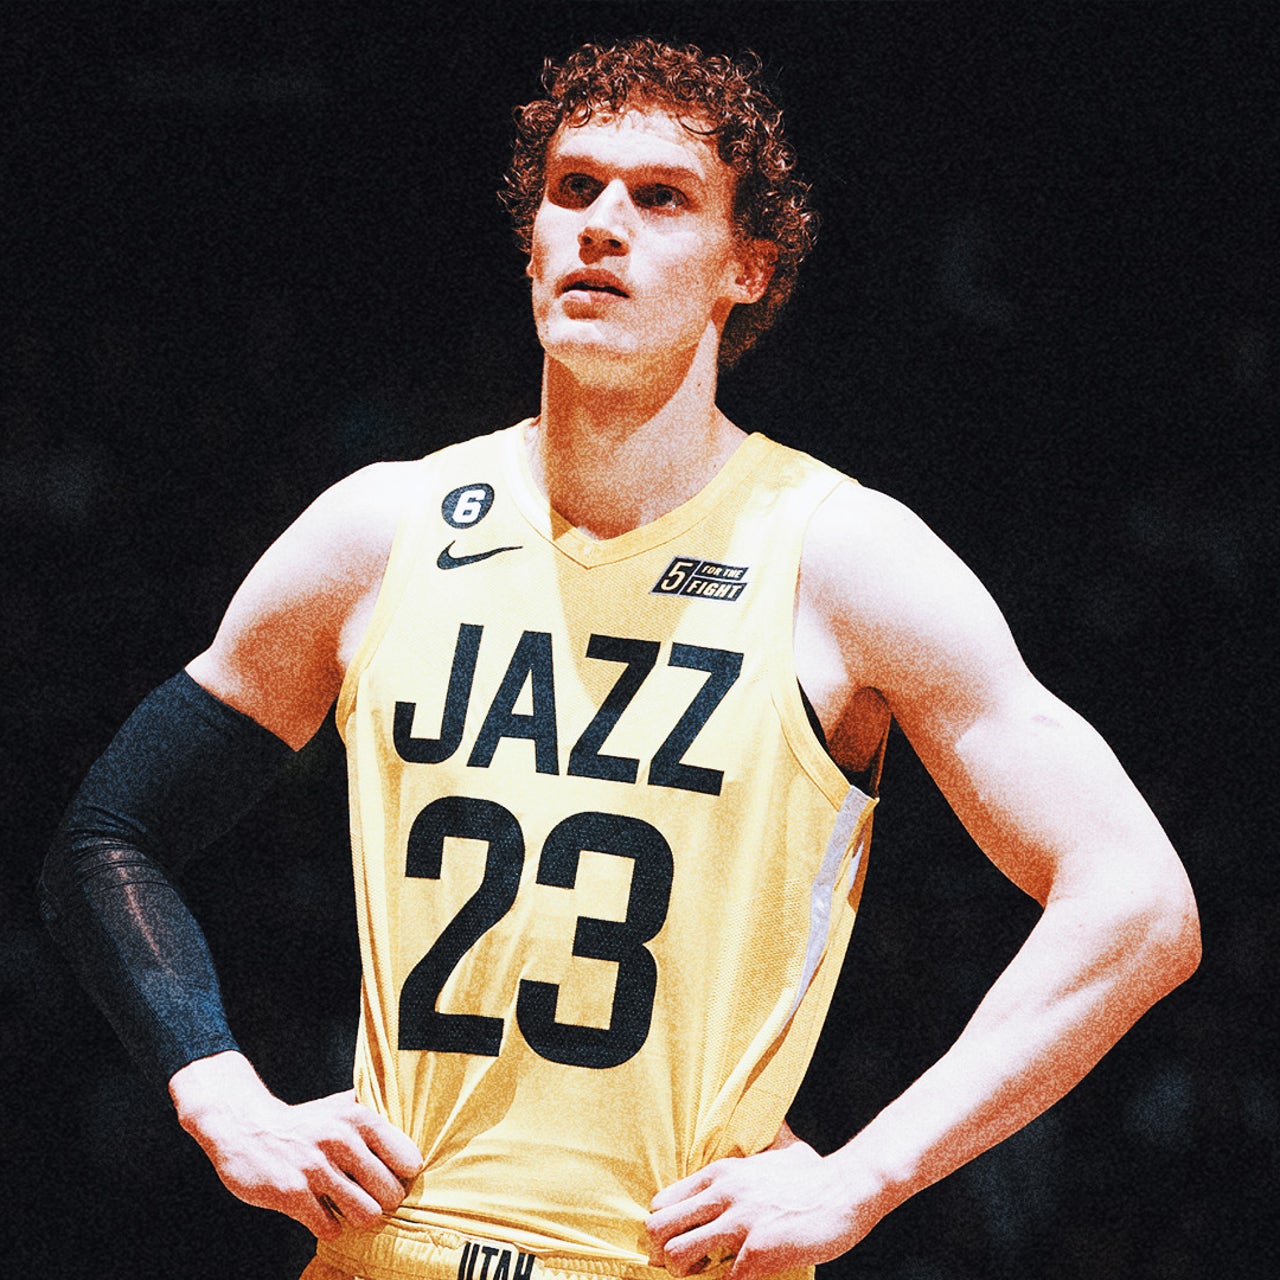 Markkanen returns to Utah Jazz after completing military service